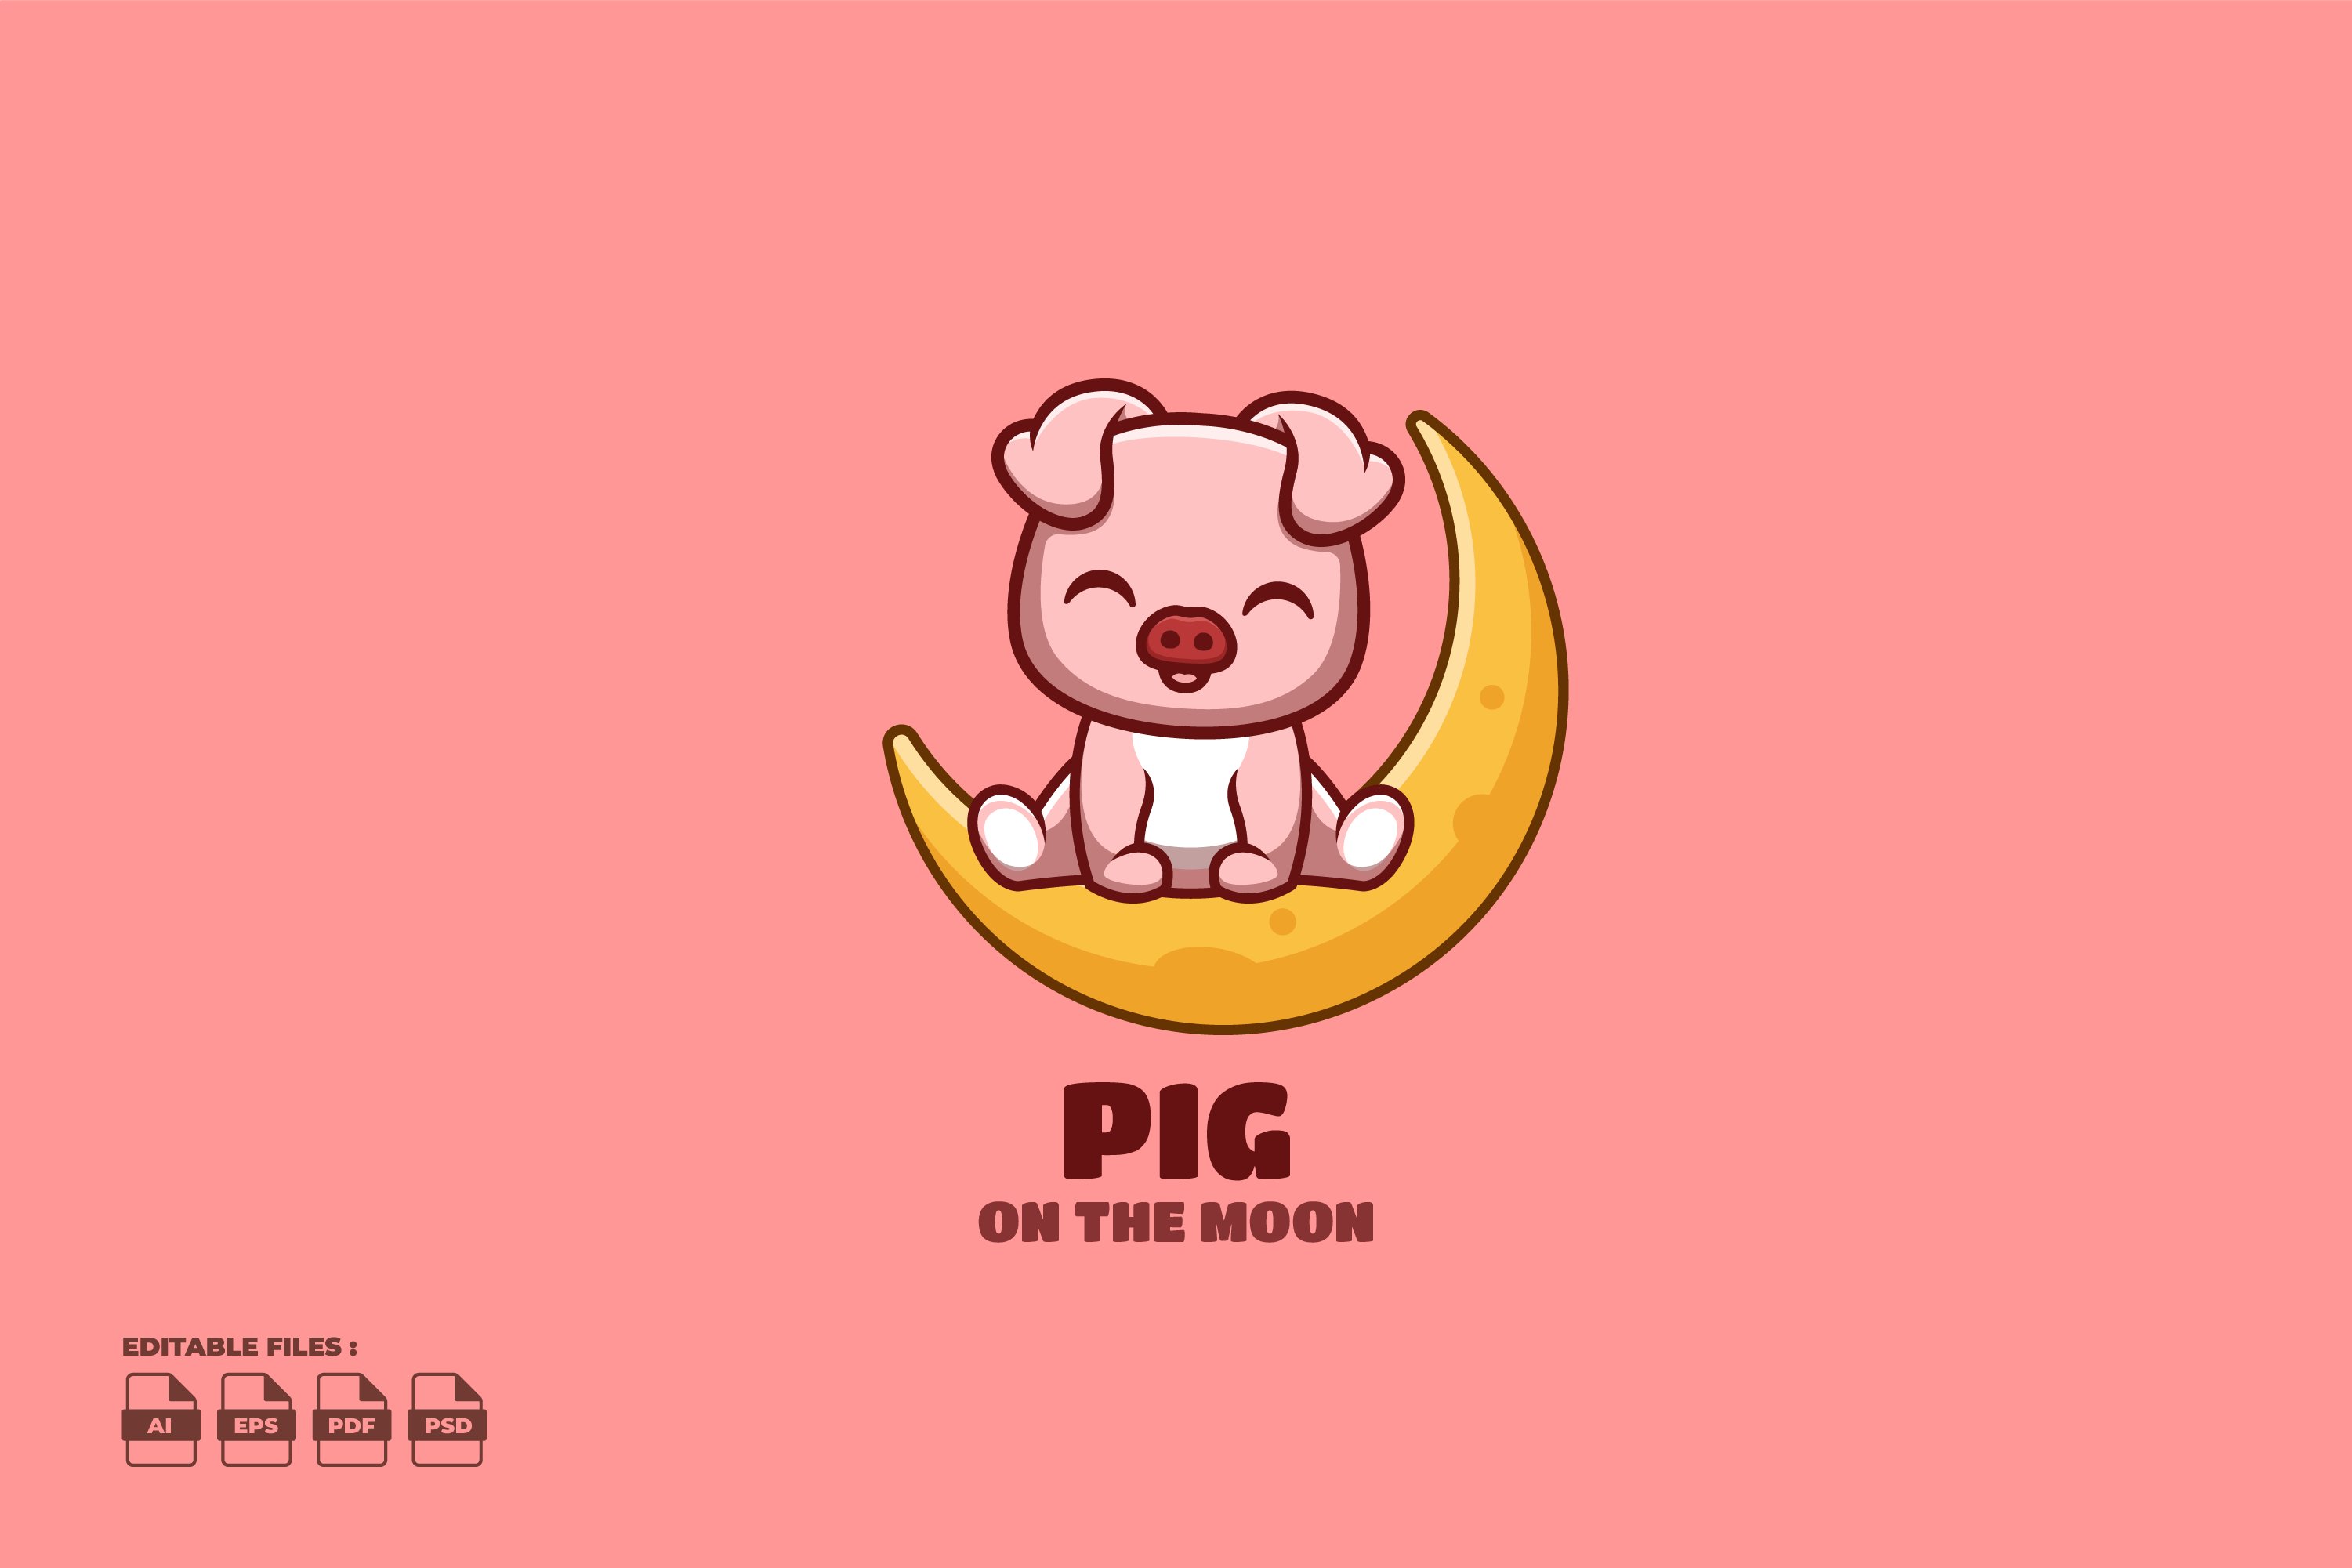 On The Moon Pig Cute Mascot Logo cover image.